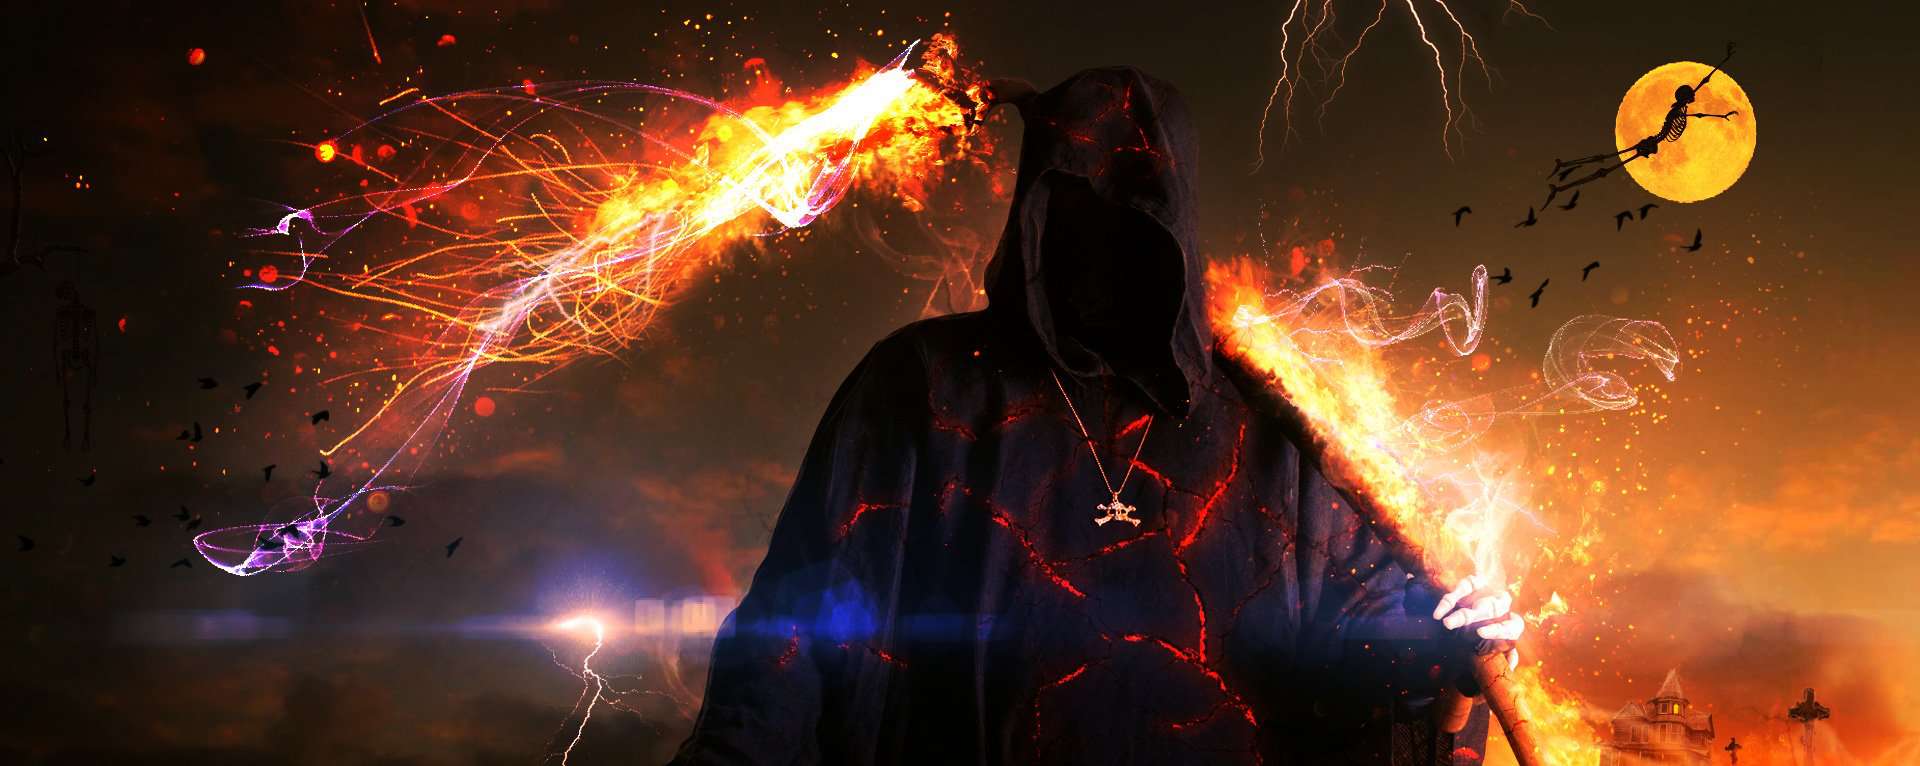 How to Create an Awesome Fiery Grim Reaper by Combining Images